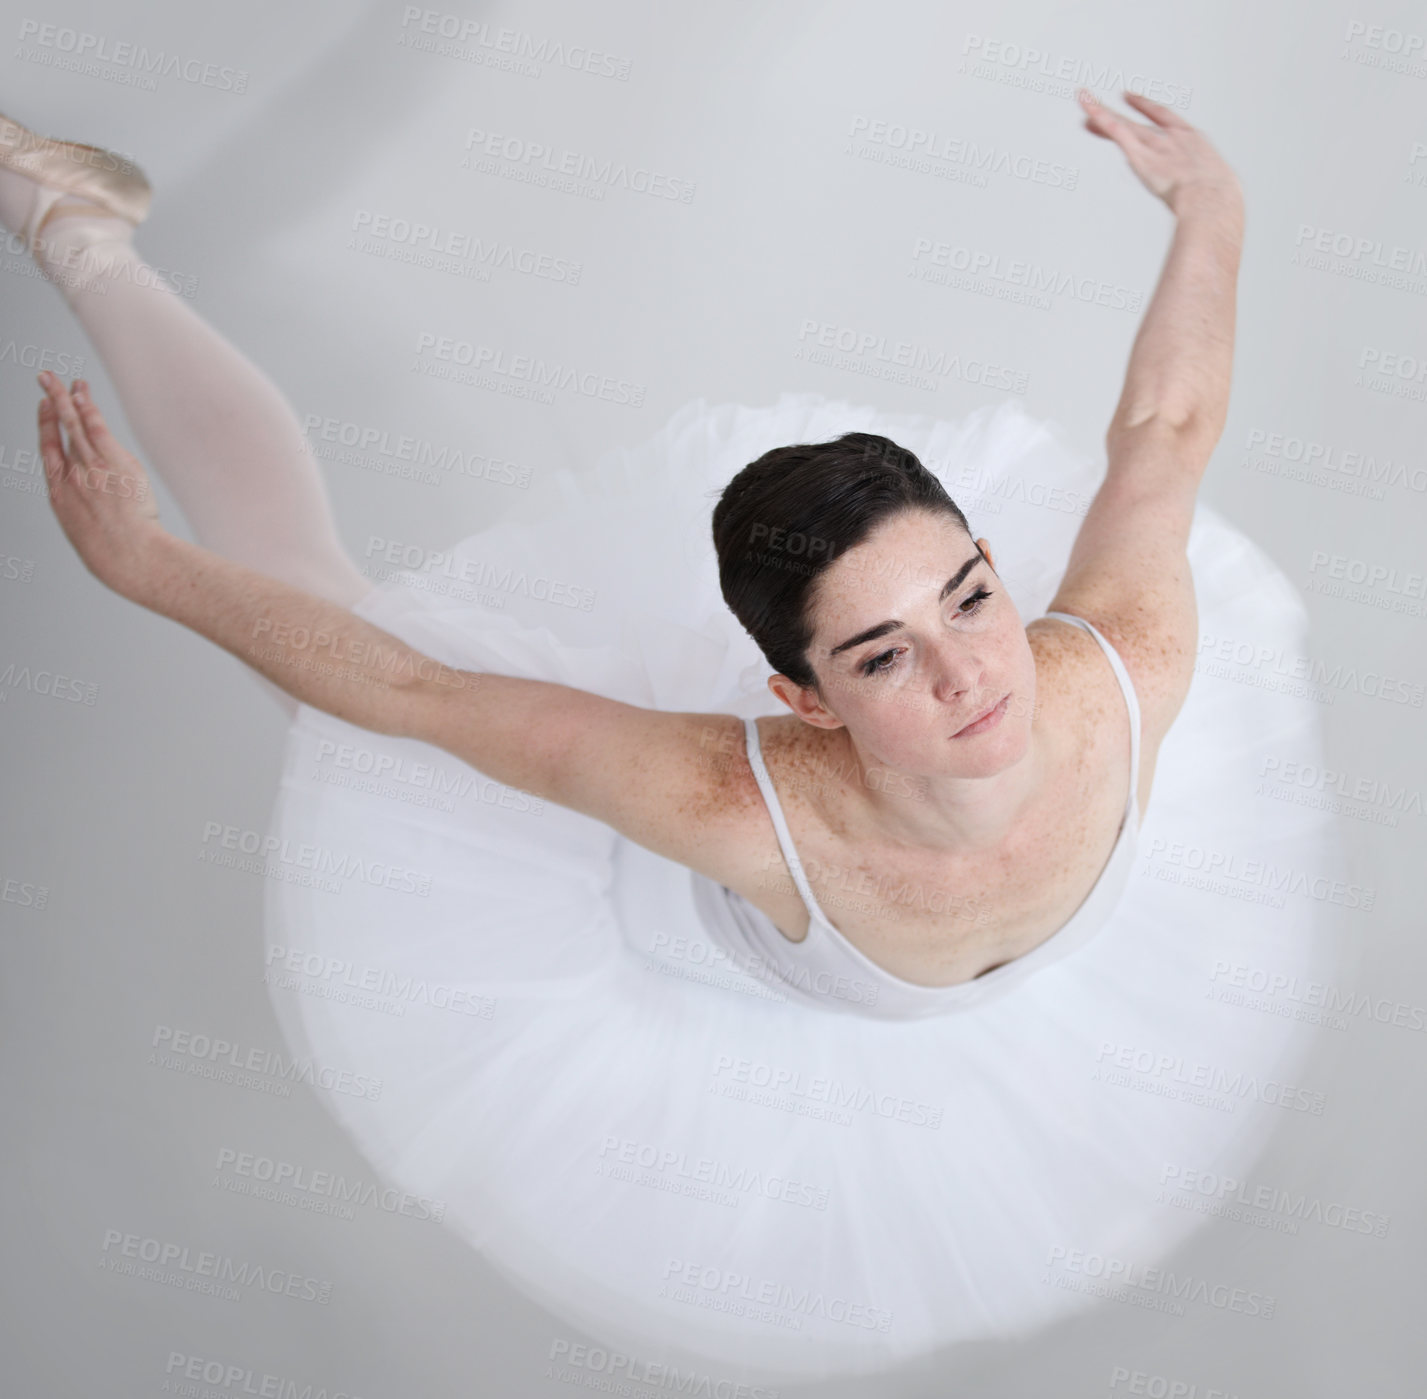 Buy stock photo Supple young ballerina dancing against a white background